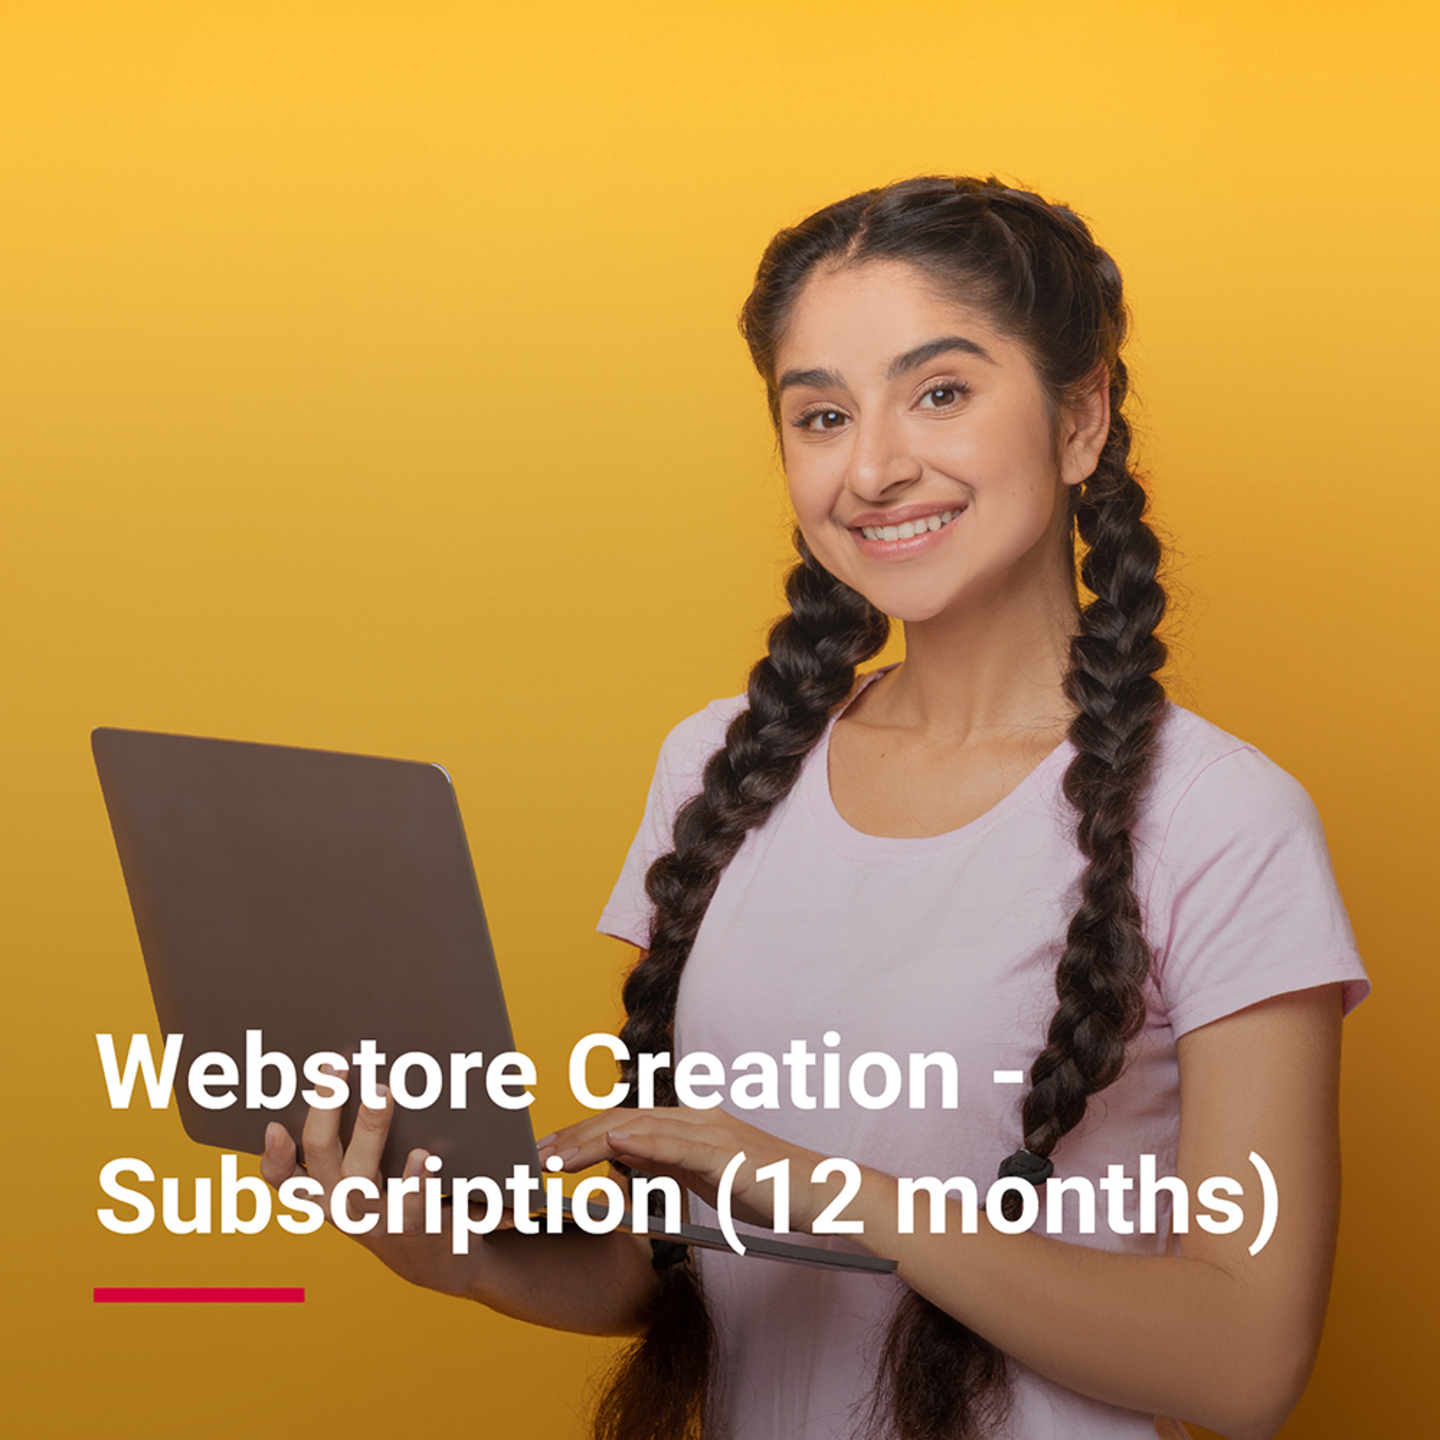 Webstore Creation - Subscription 12 months